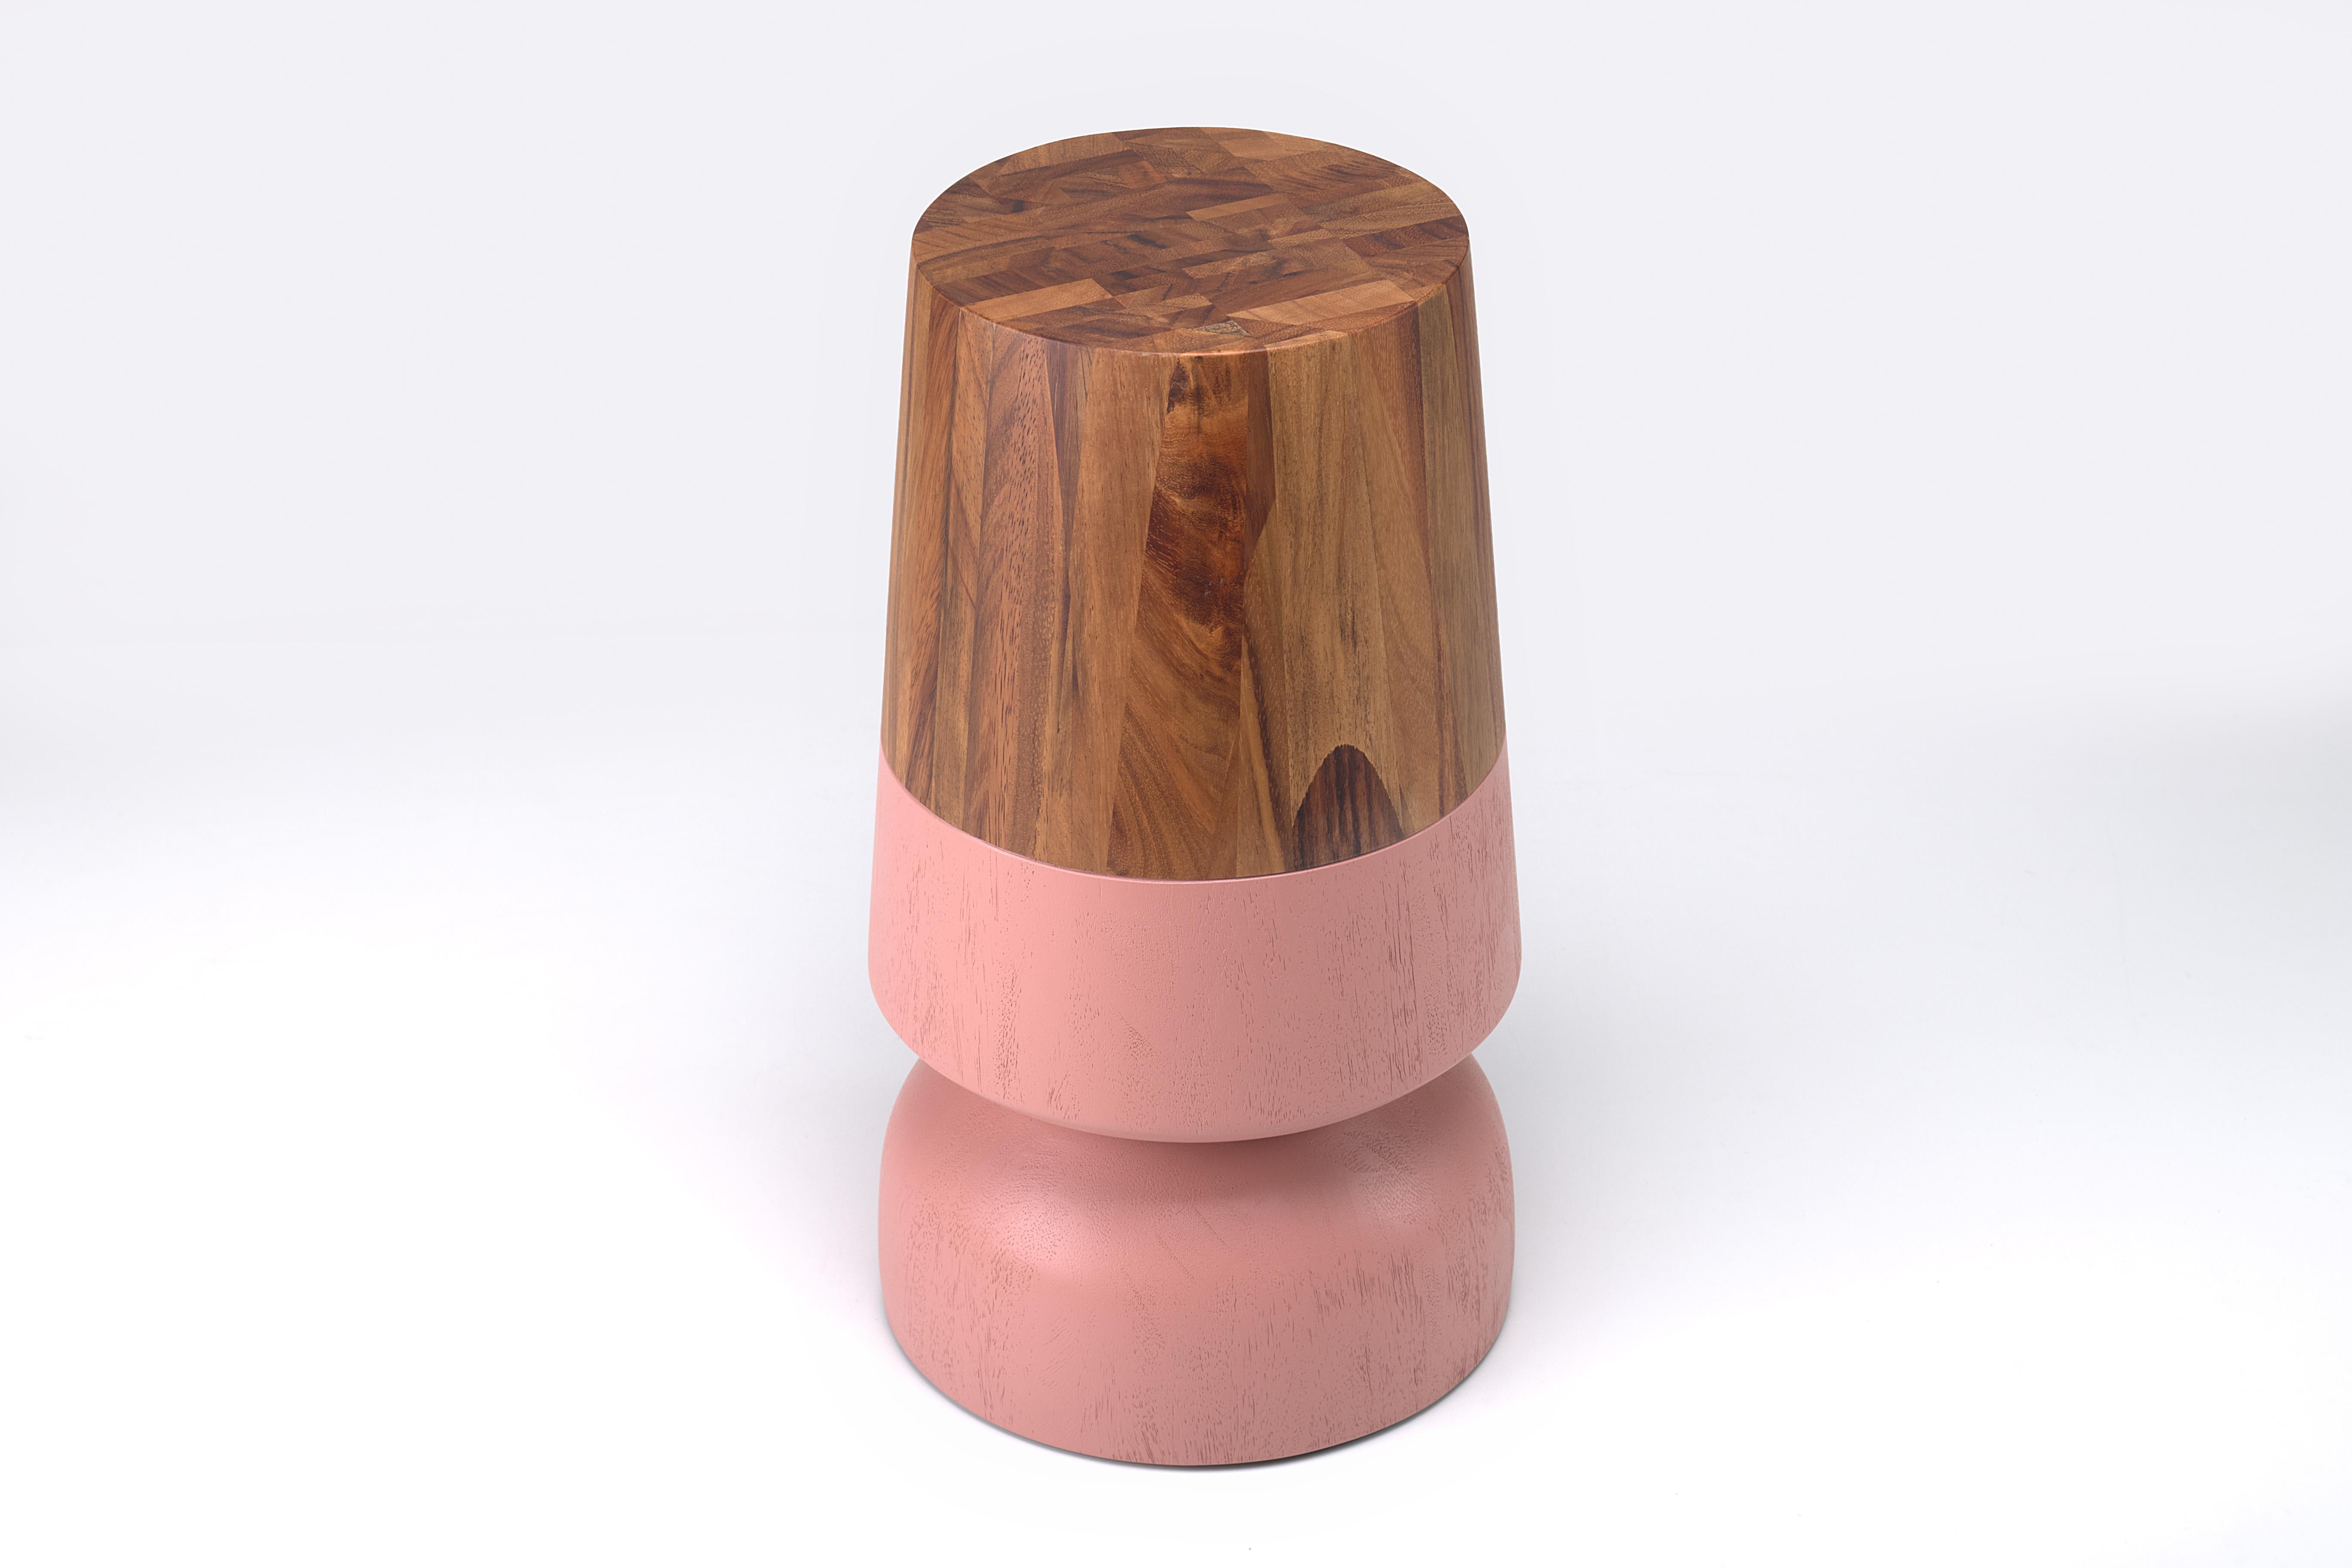 Discover the joy of a beloved childhood toy transformed into a stunning statement piece for your home. Our Capirucho Turned Drink Table, crafted from the majestic Conacaste wood, finds its playful inspiration from the quintessential Capirucho toy